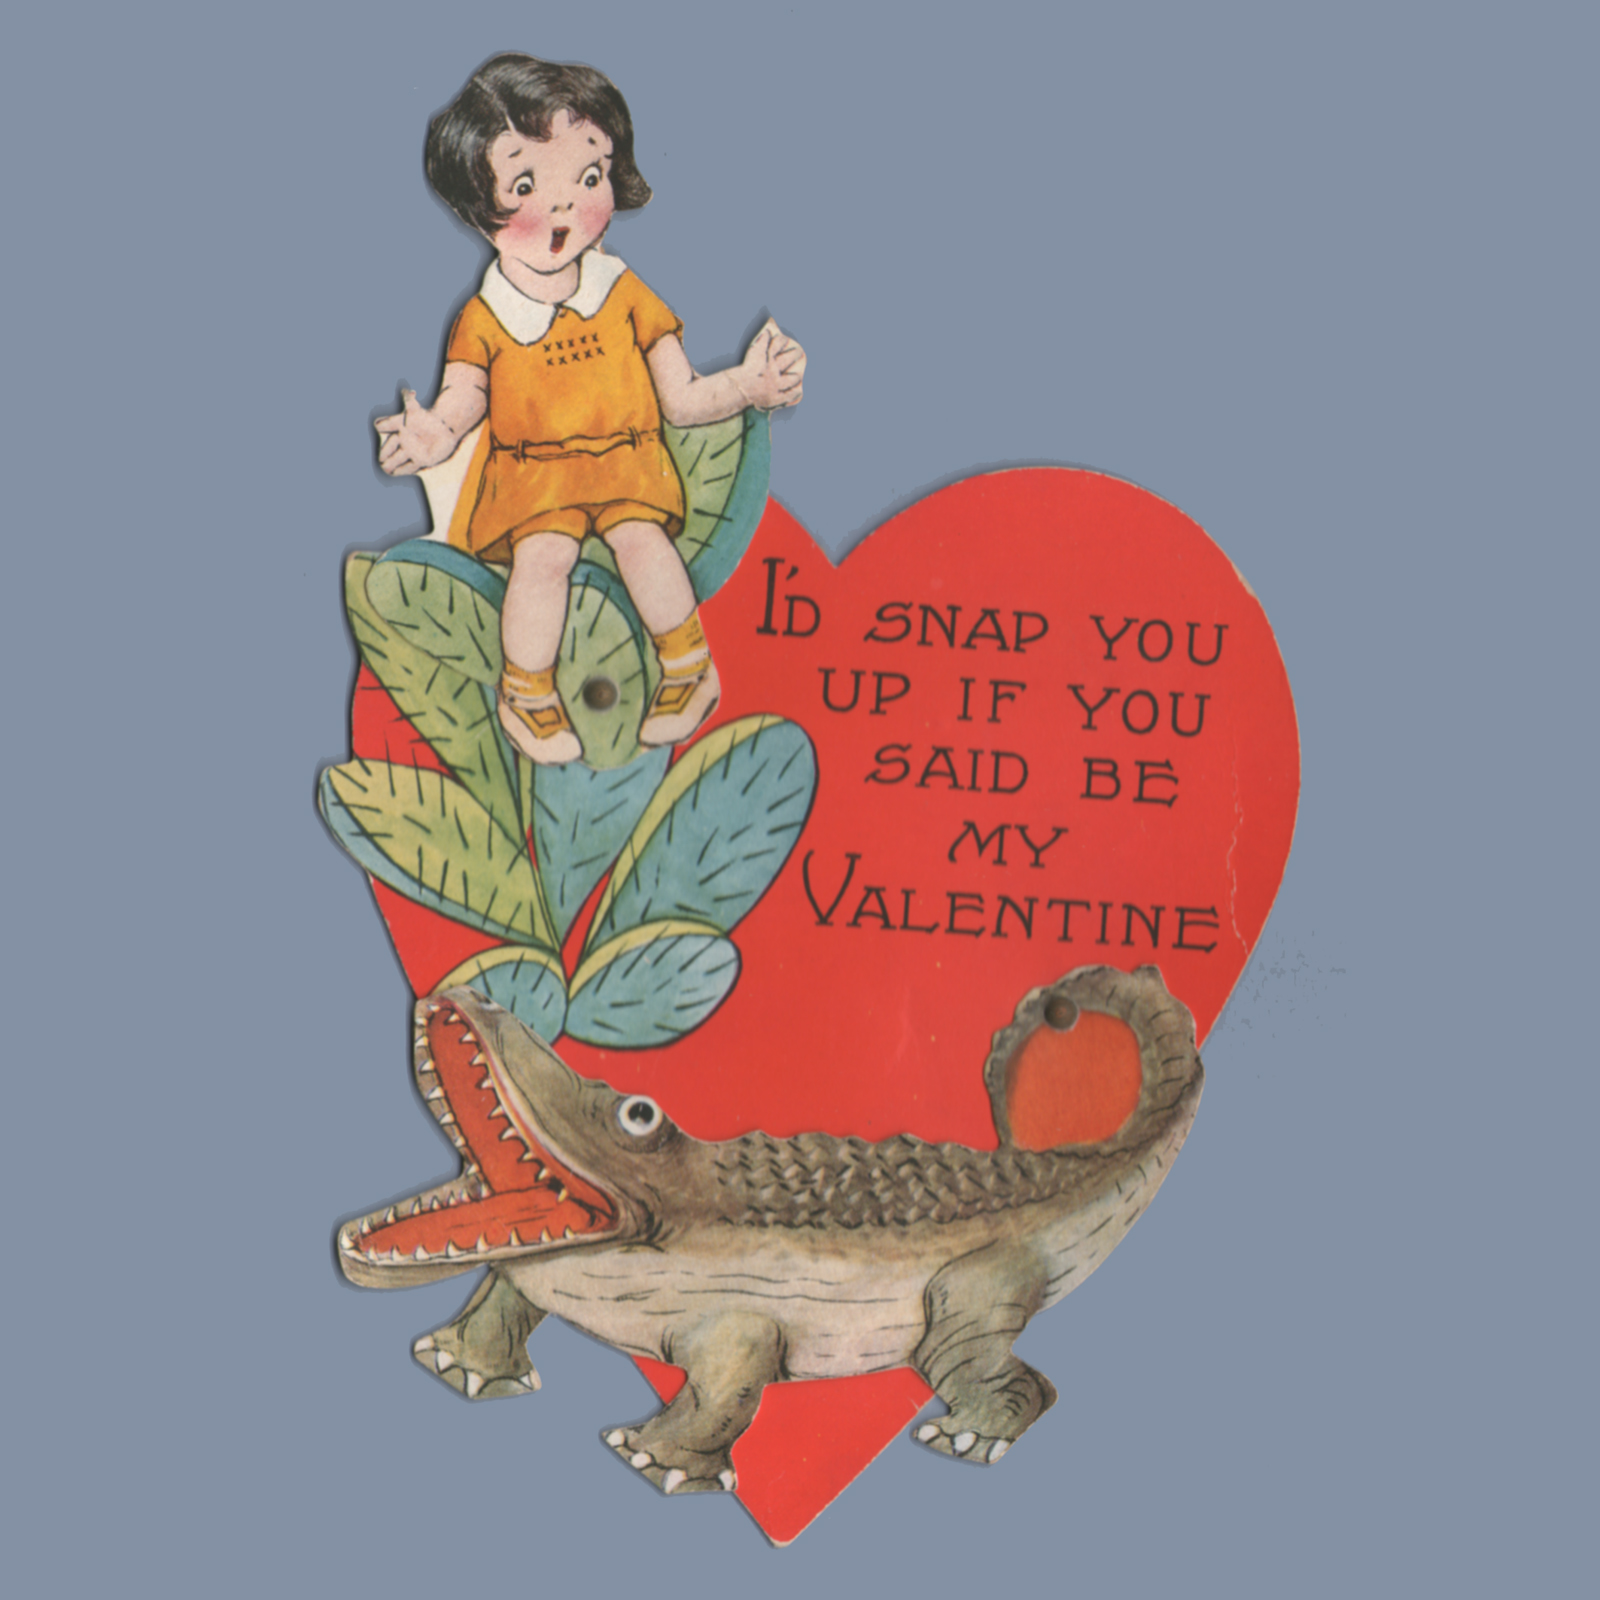 I'd snap you up if you said be my valentine. circa 1930s. 